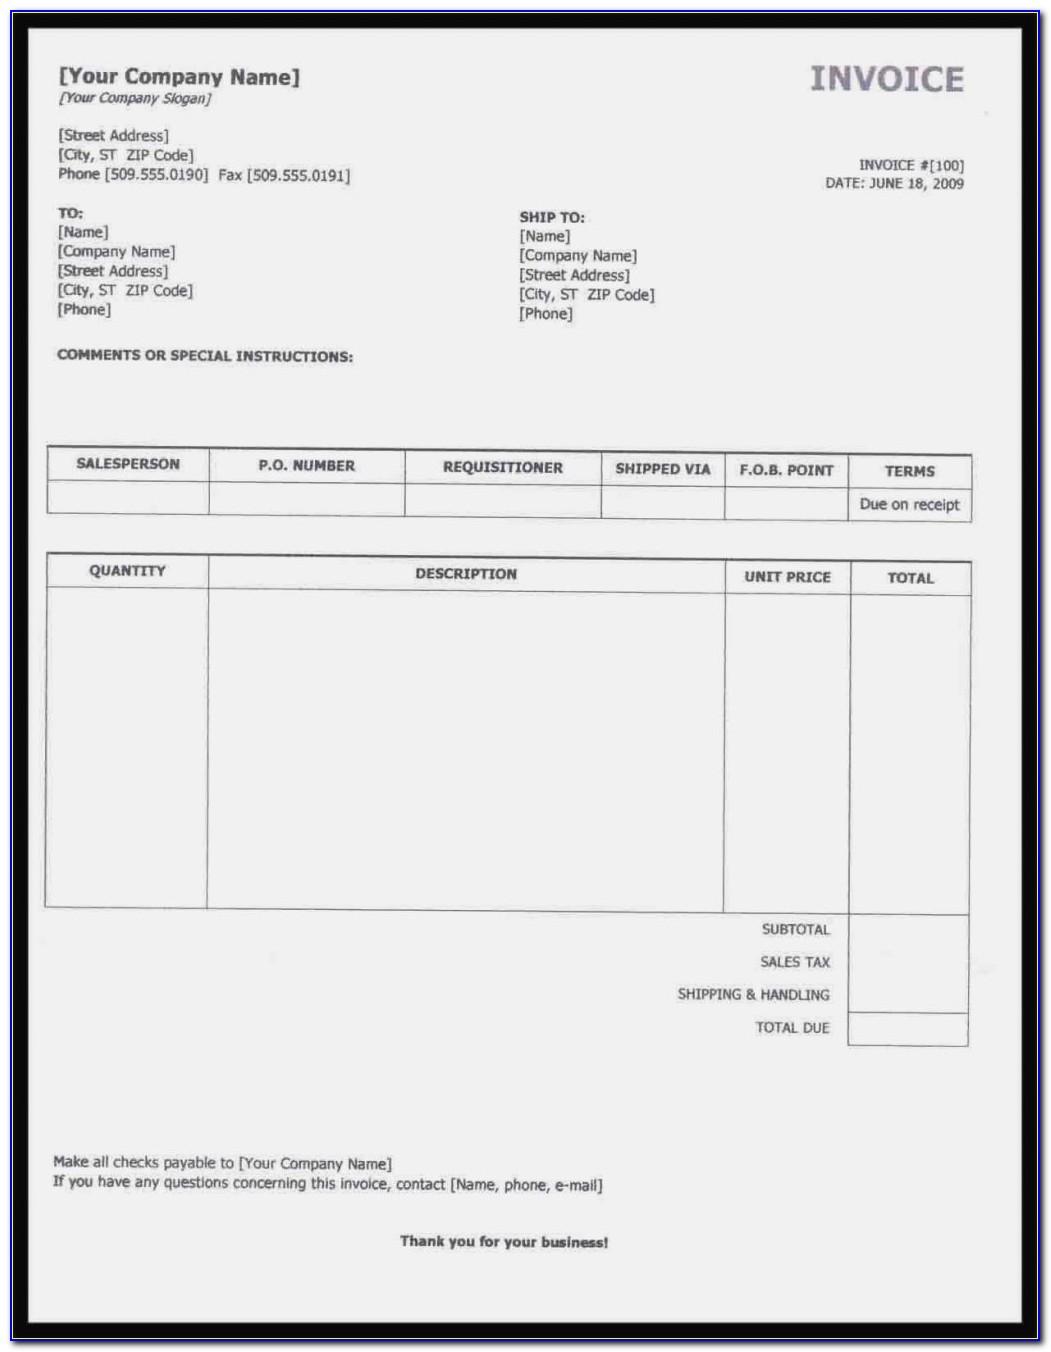 Self Billed Invoice Example